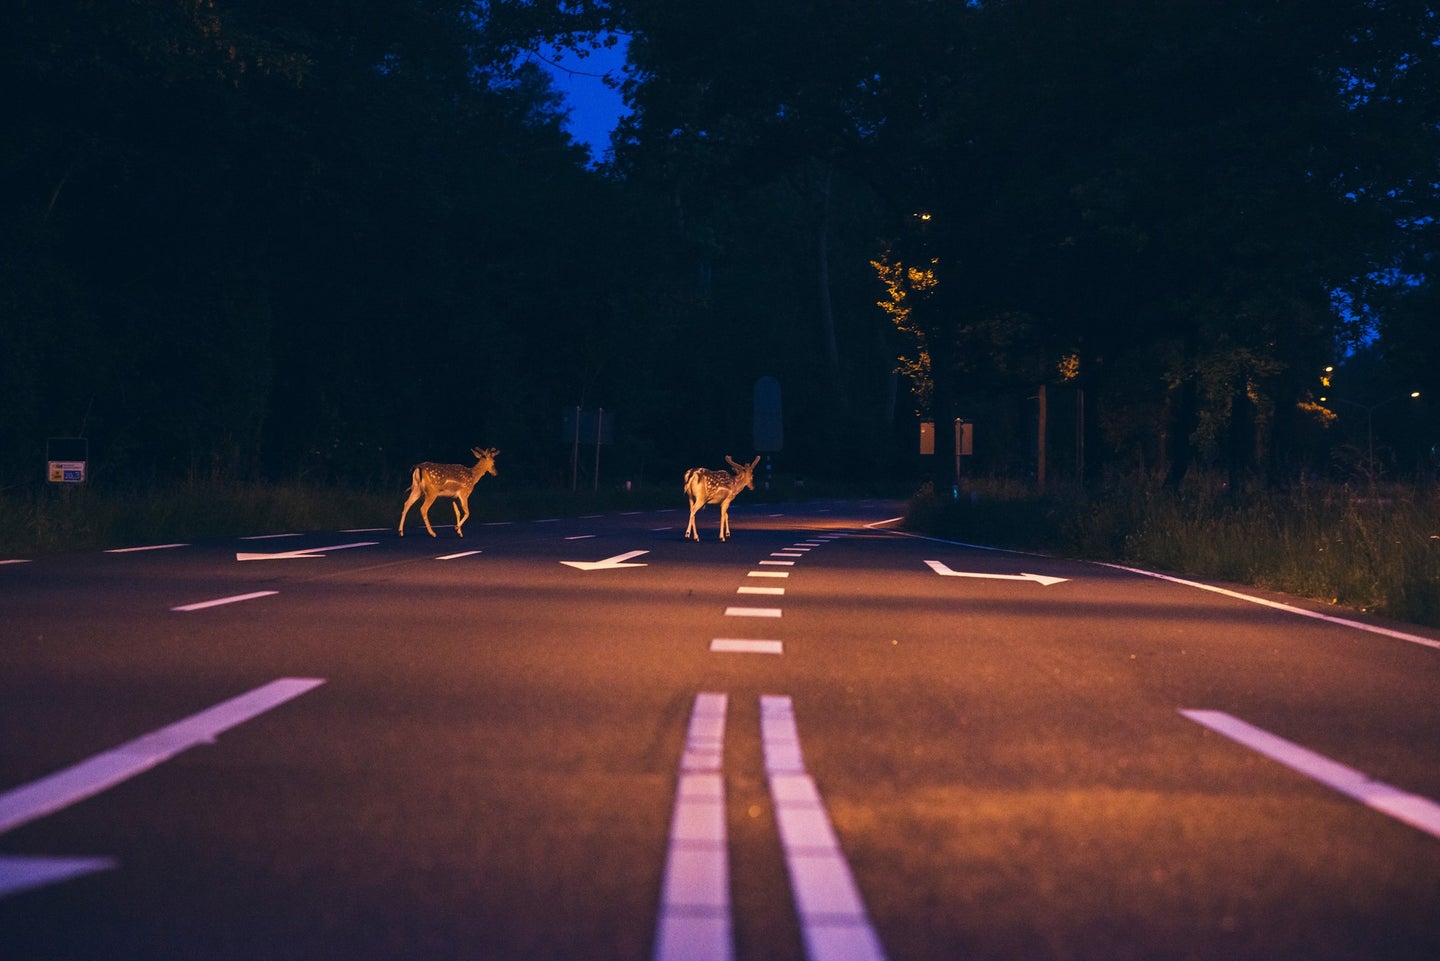 Deer on the road at night risking a car crash